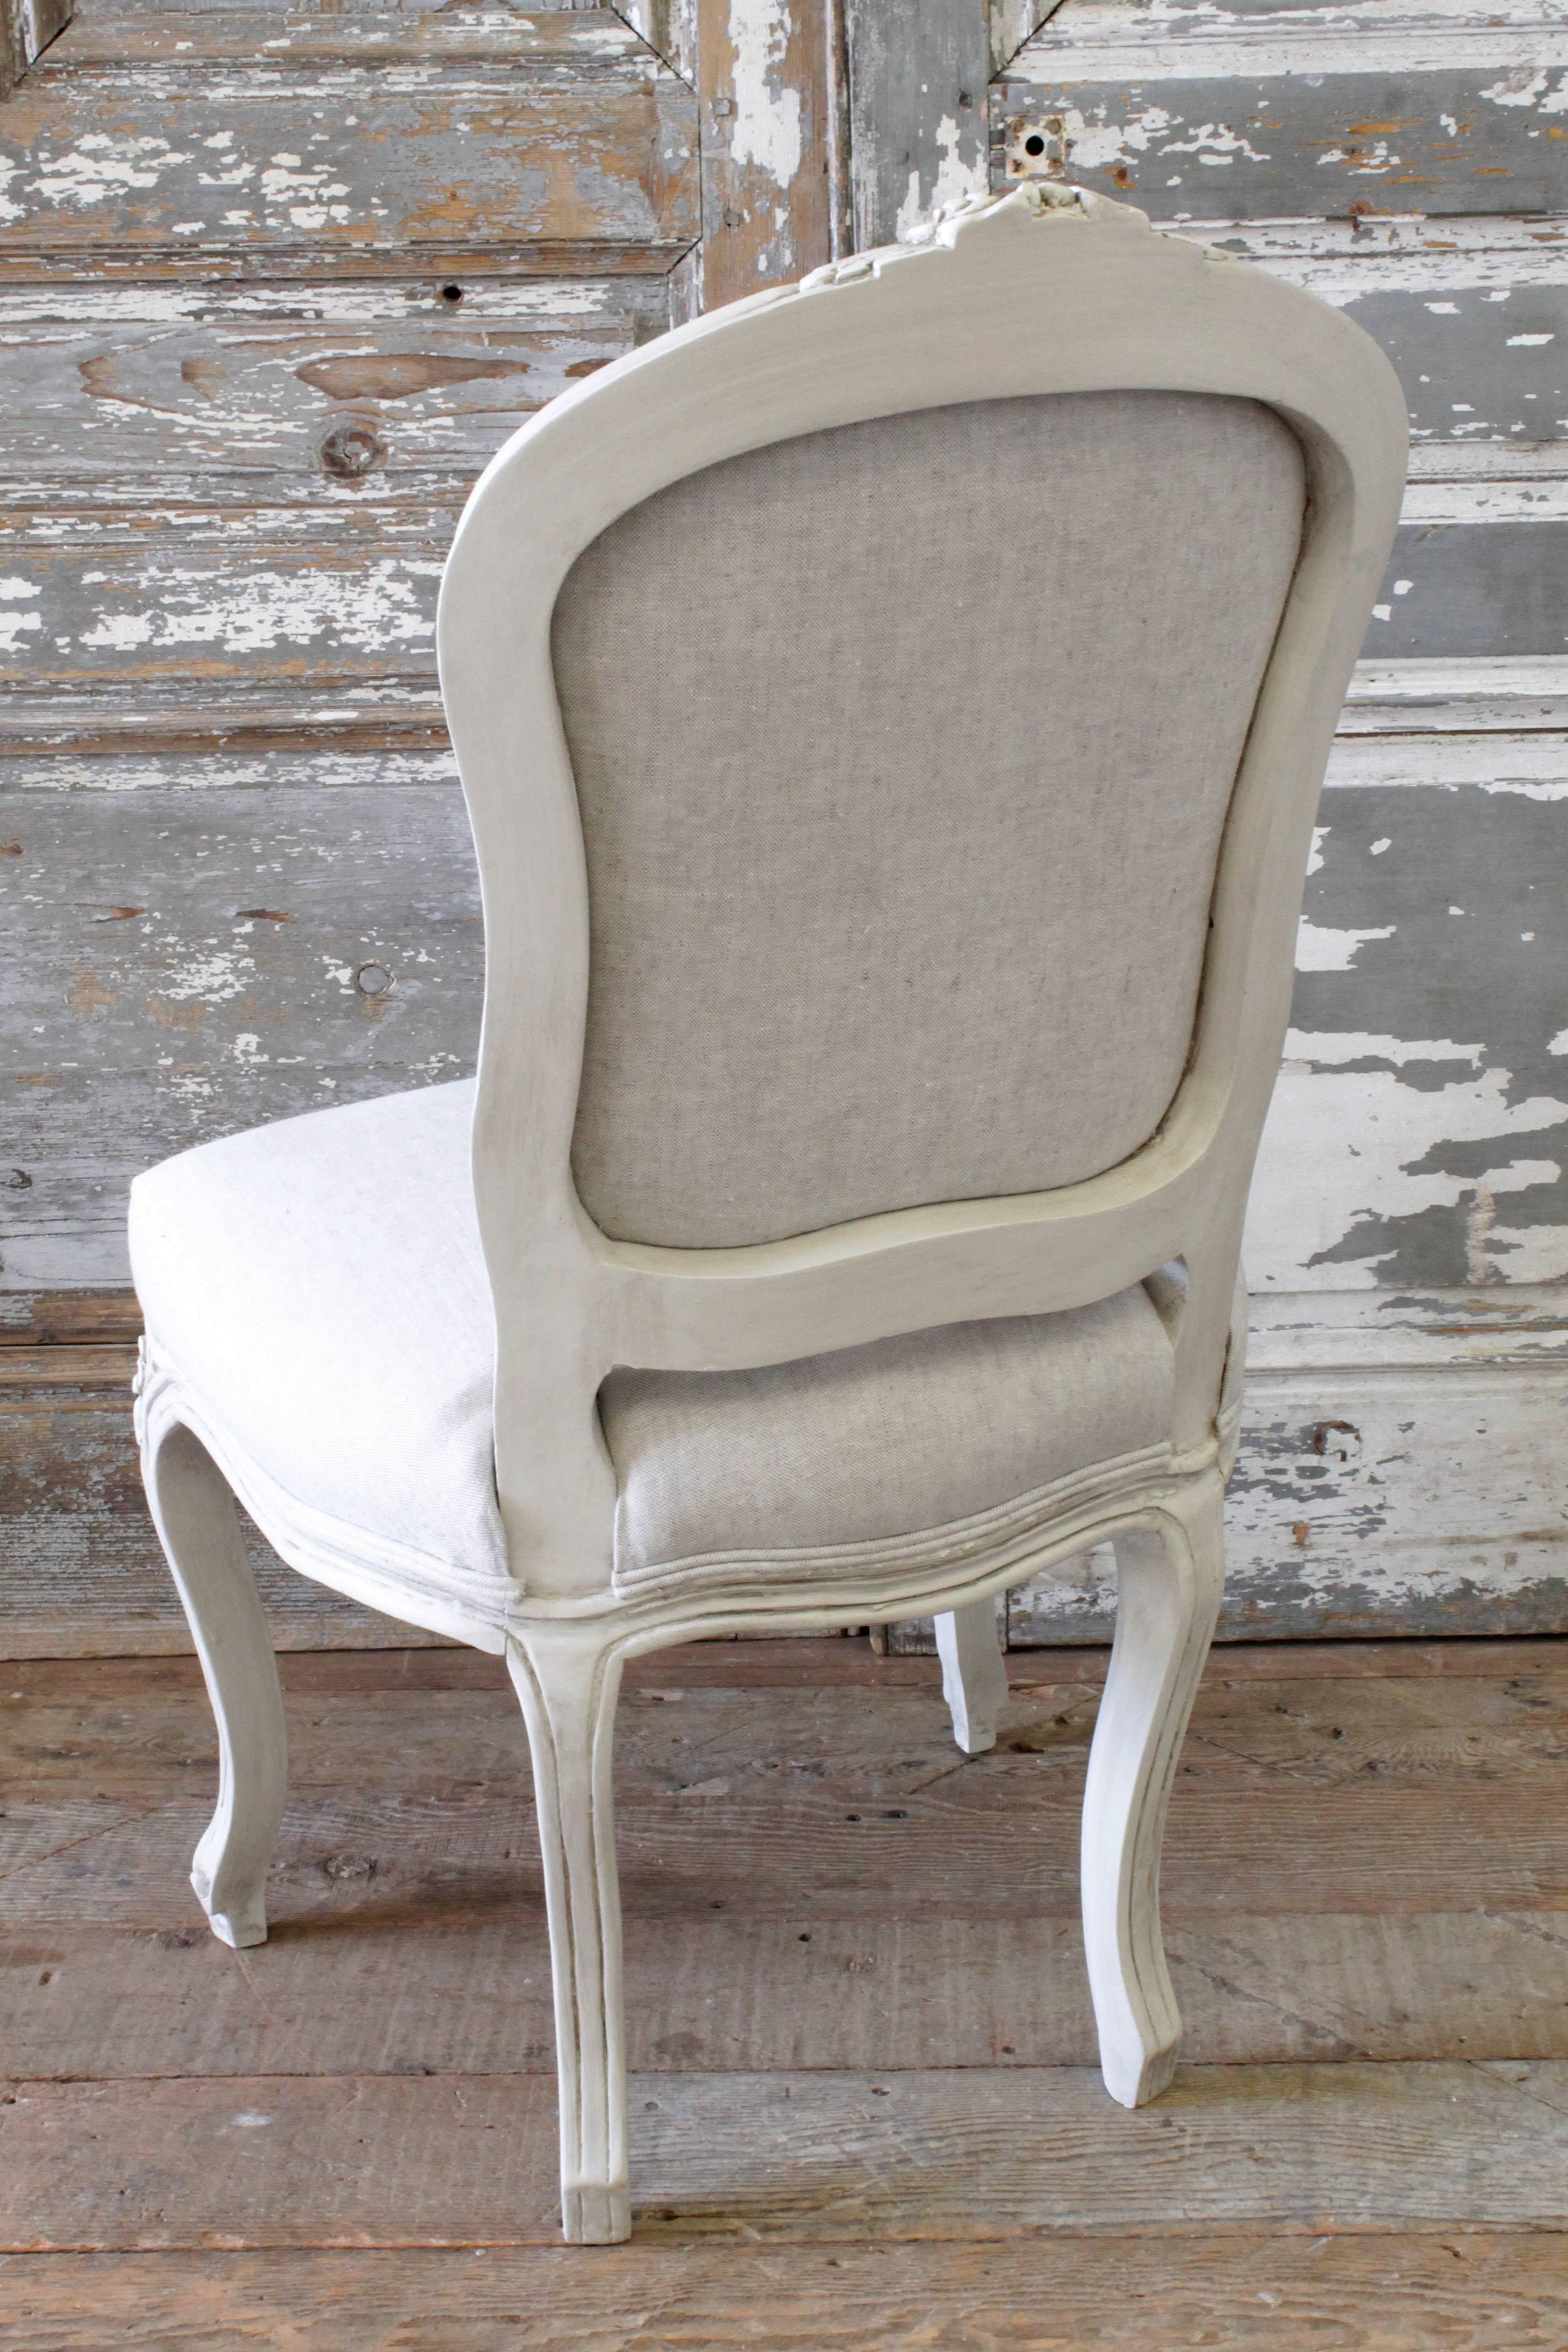 Fabulous set of eight Louis XV style dining chairs
Painted in our oyster white, with new upholstery in 100% natural organic Belgian linen.
Each chair is very solid and sturdy, ready for everyday use.
 